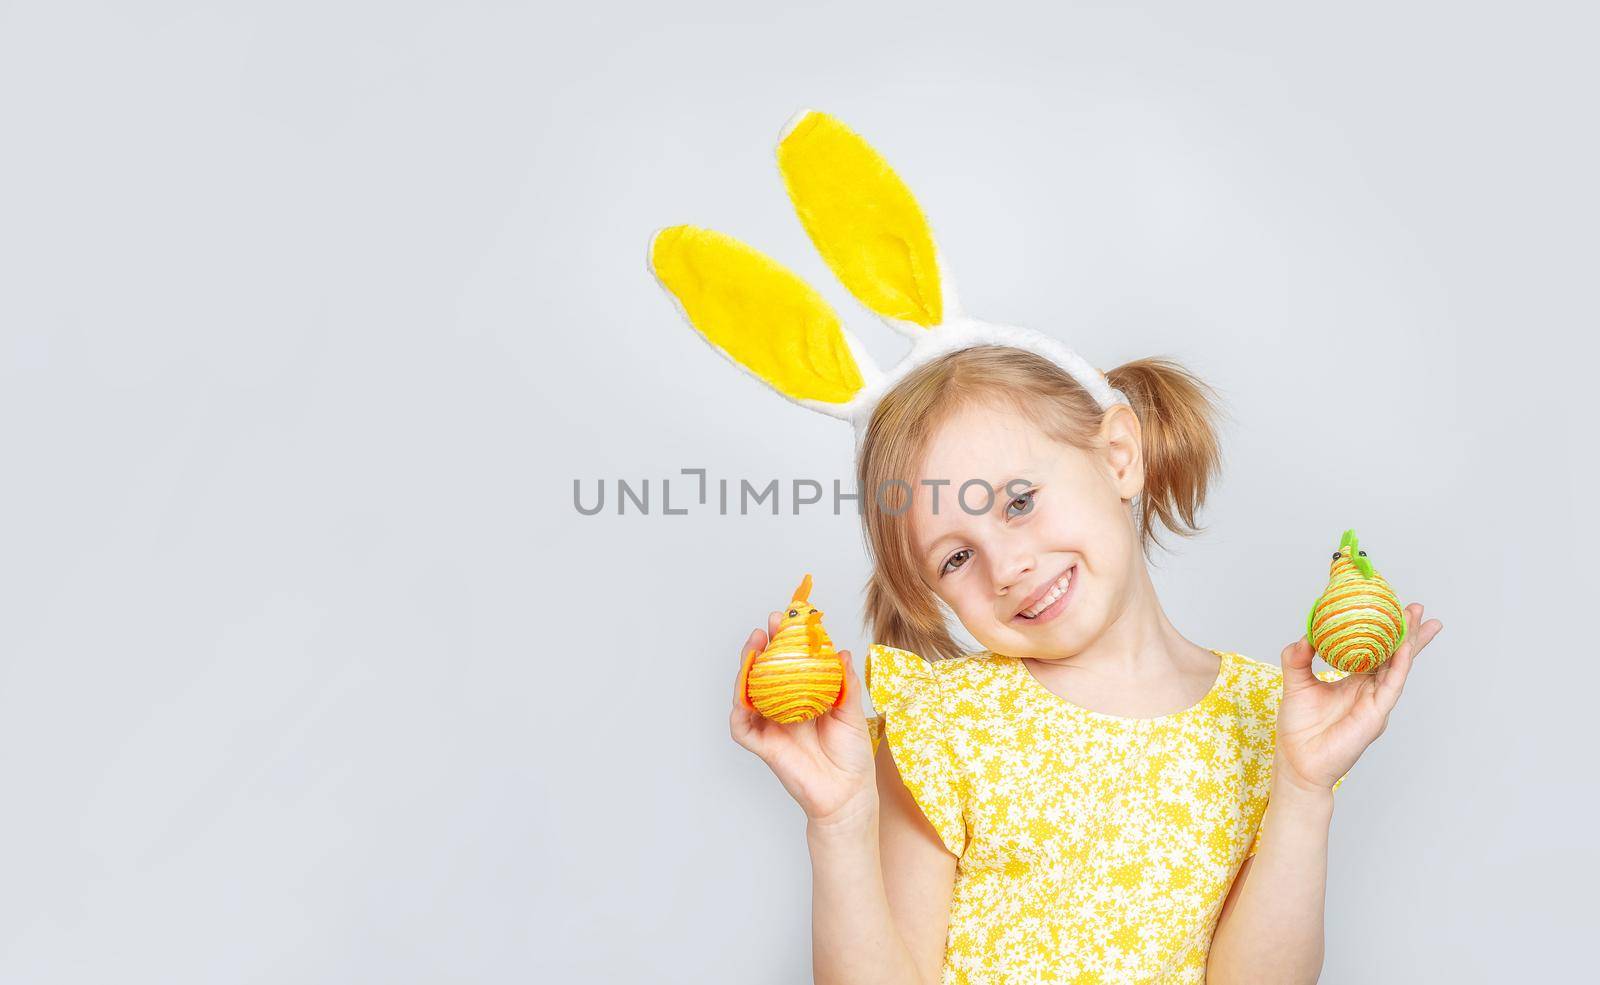 Portrait of a little cute Caucasian smiling girl with bunny ears and decorations for Easter in hands on a gray background. Easter background with place to insert text.